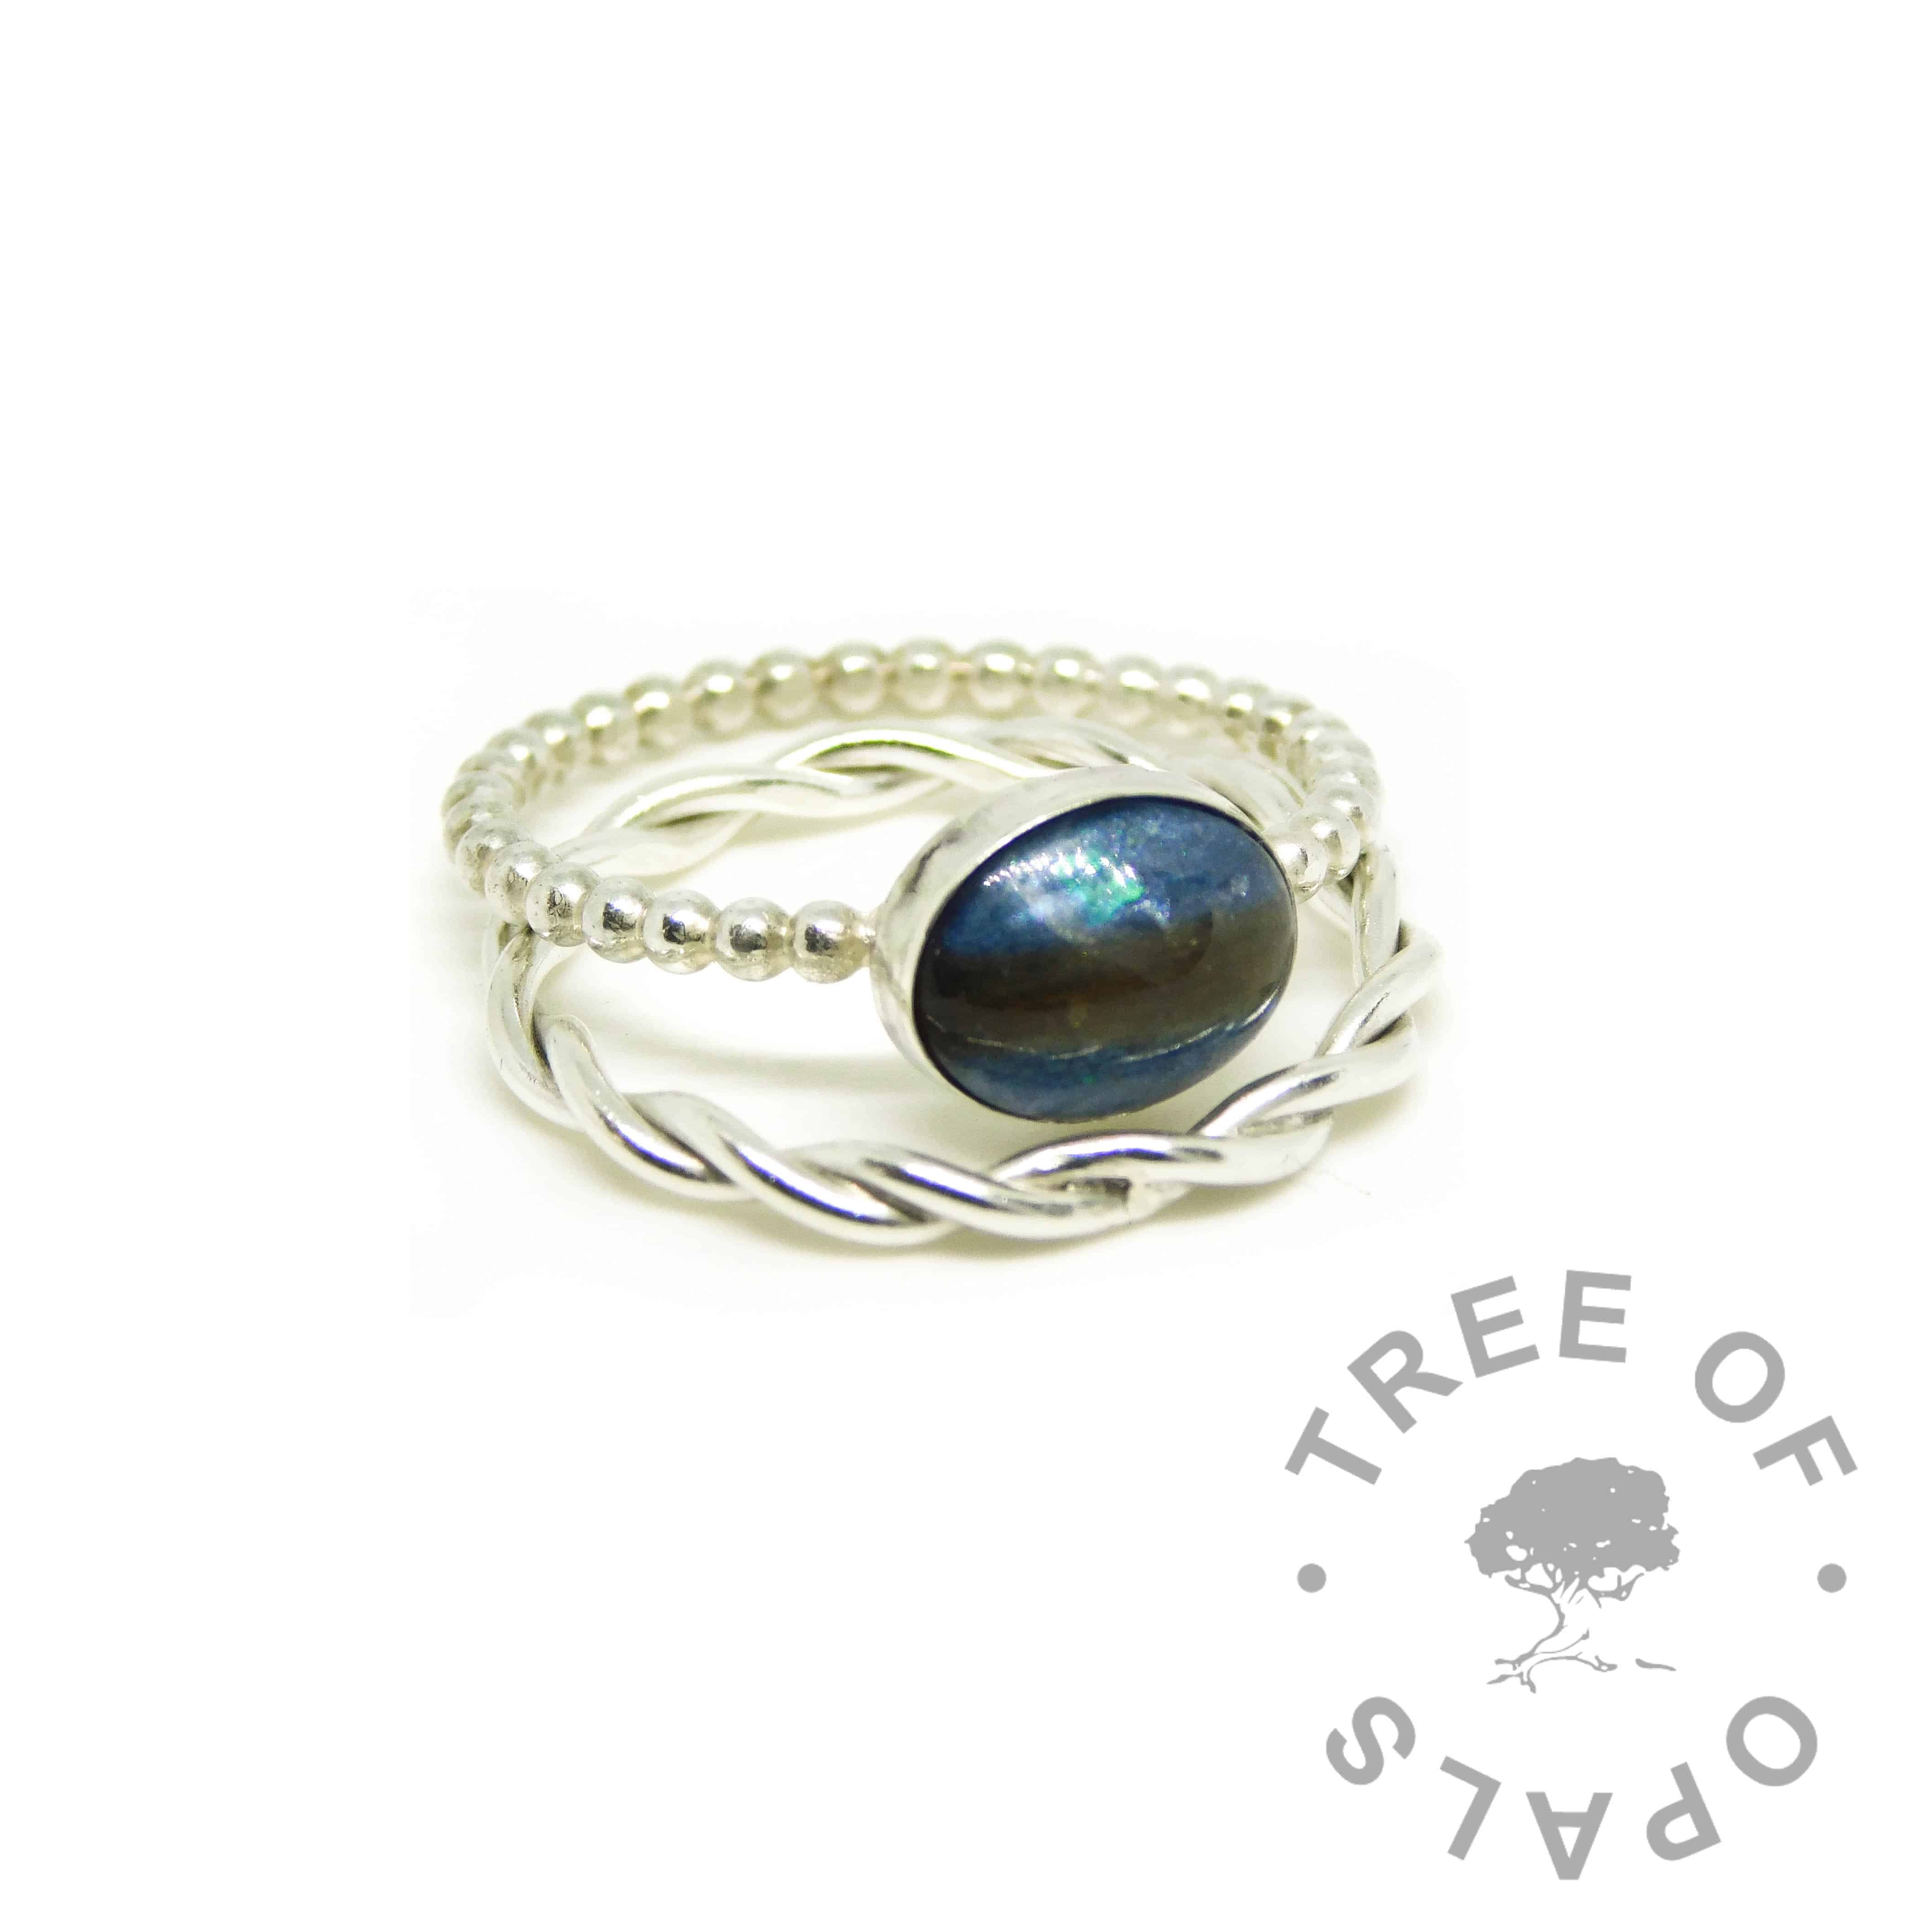 blue hair ring, Aegean blue resin sparkle mix, bubble wire Argentium silver band. Shown with a twisted band slim stacking ring